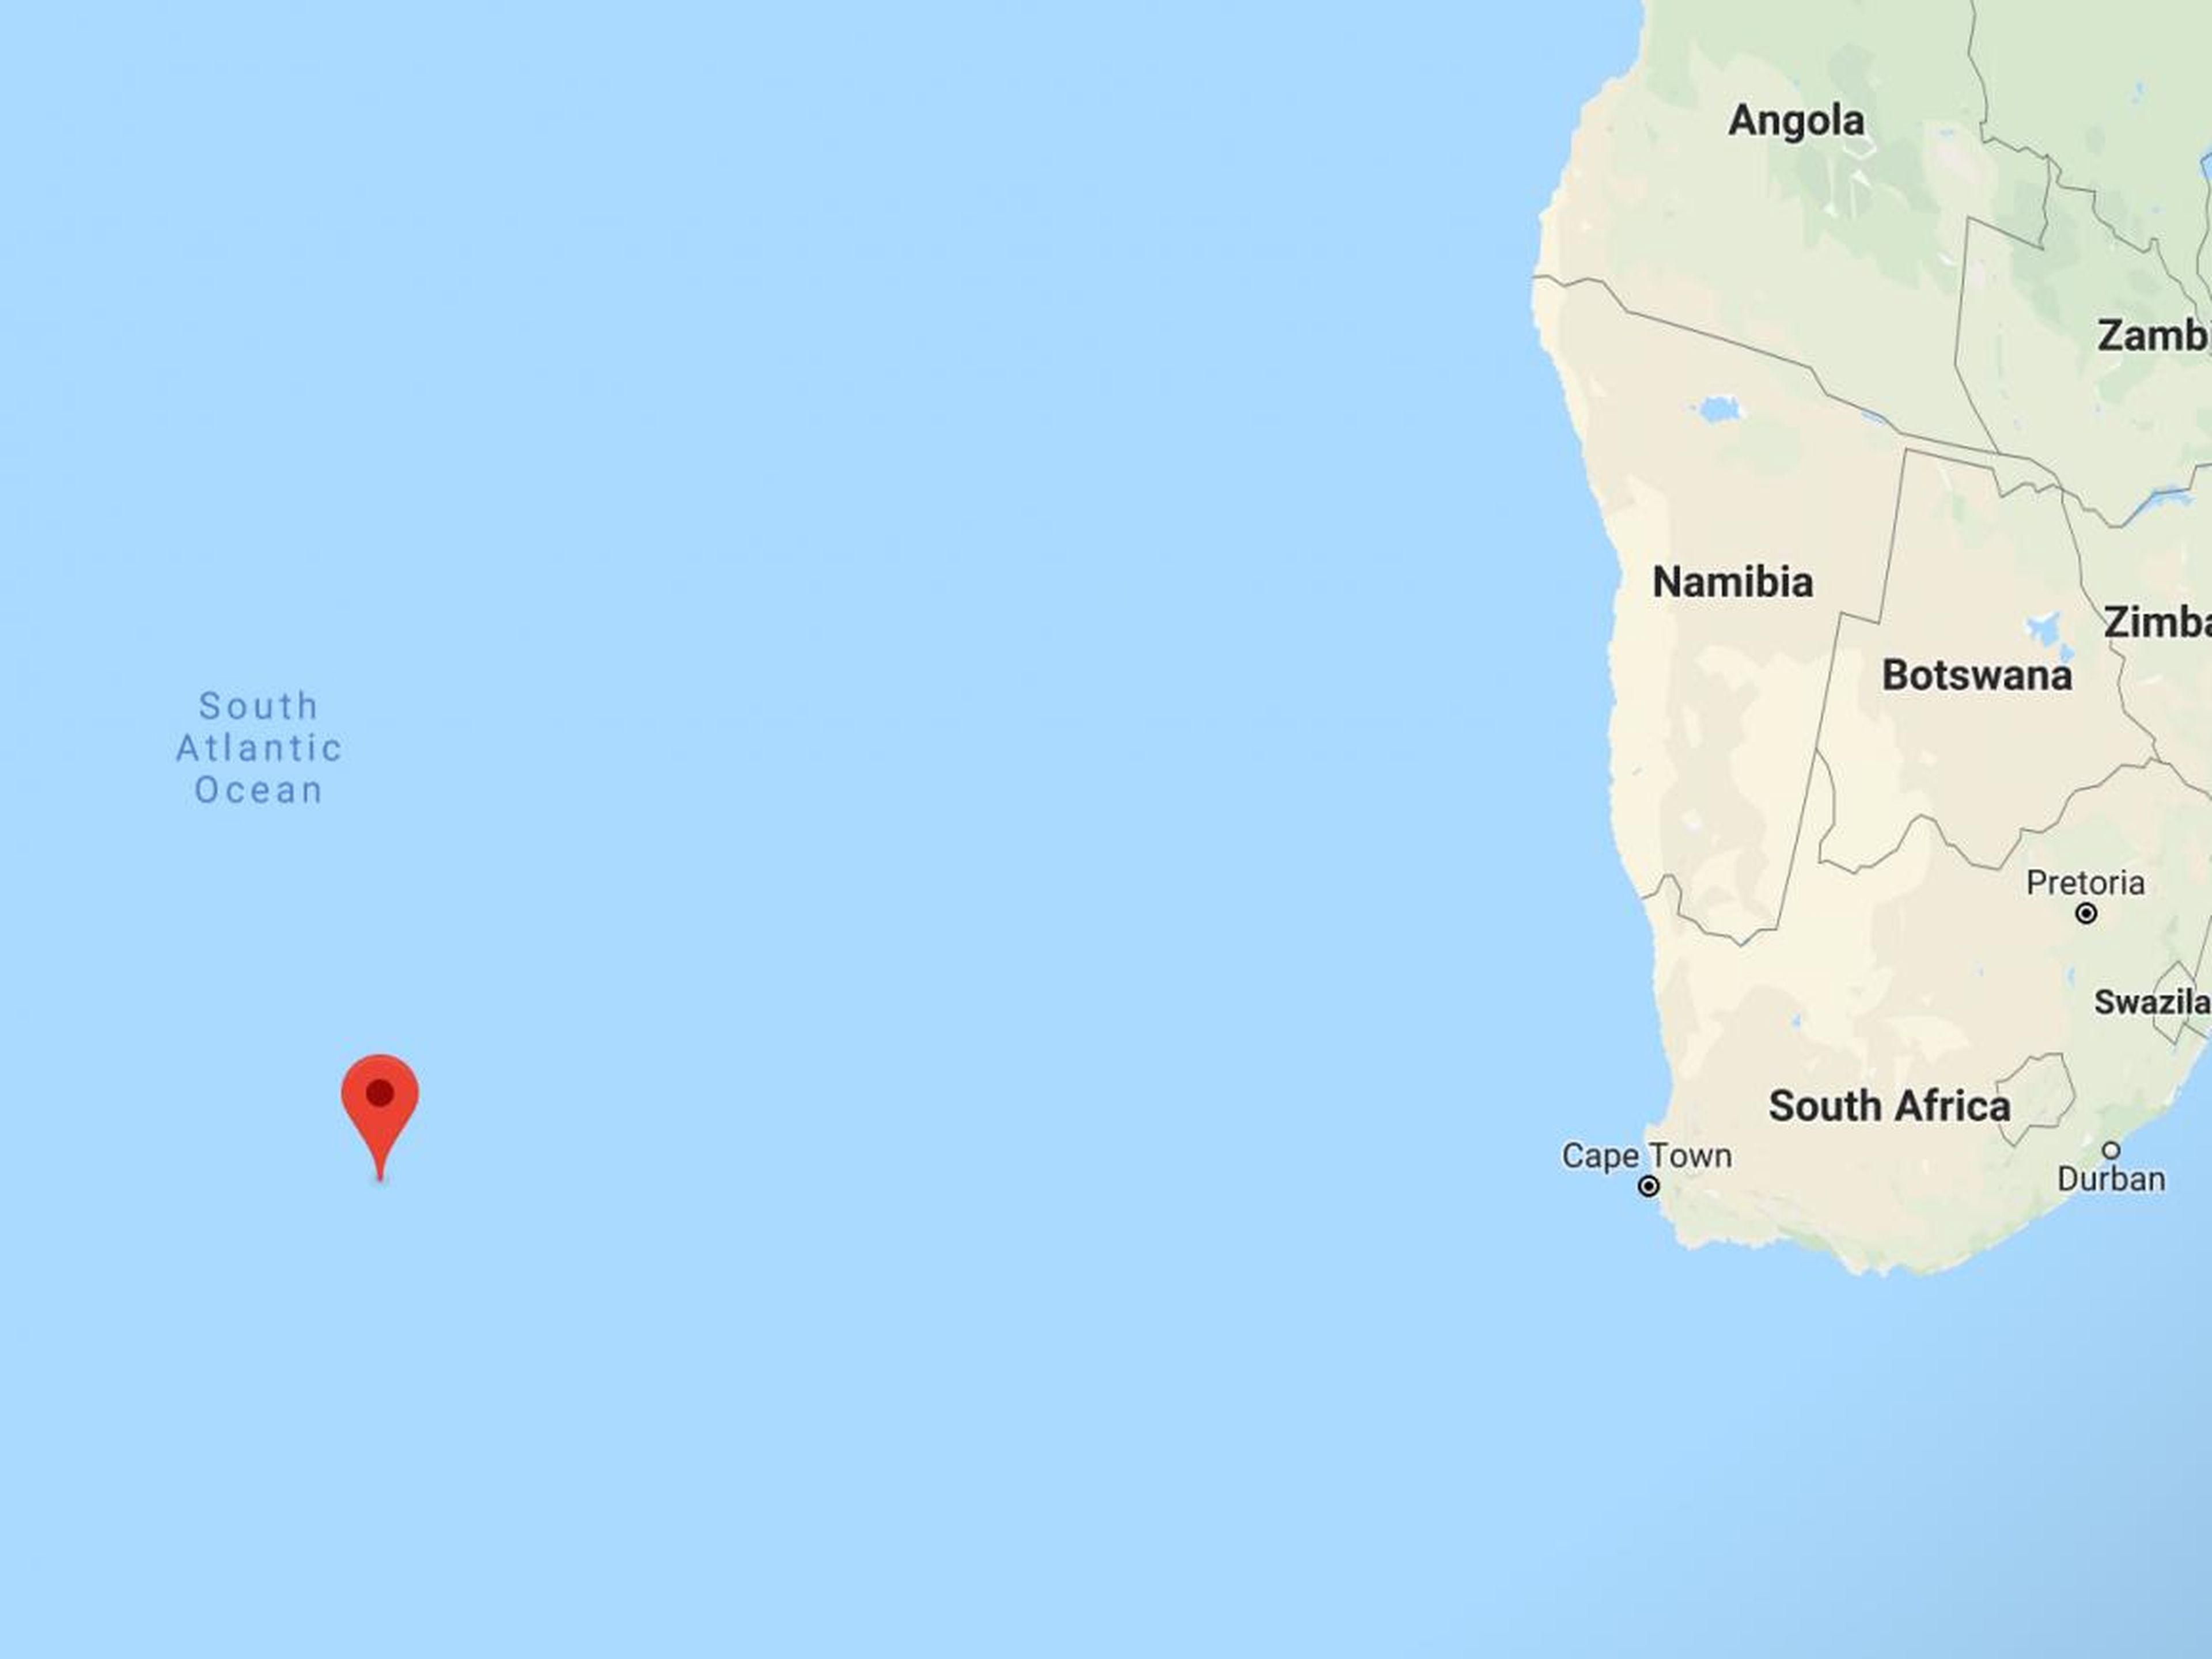 The island of Tristan da Cunha is more than 1,700 miles (nearly 2,800 kilometers) off the coast of Cape Town.